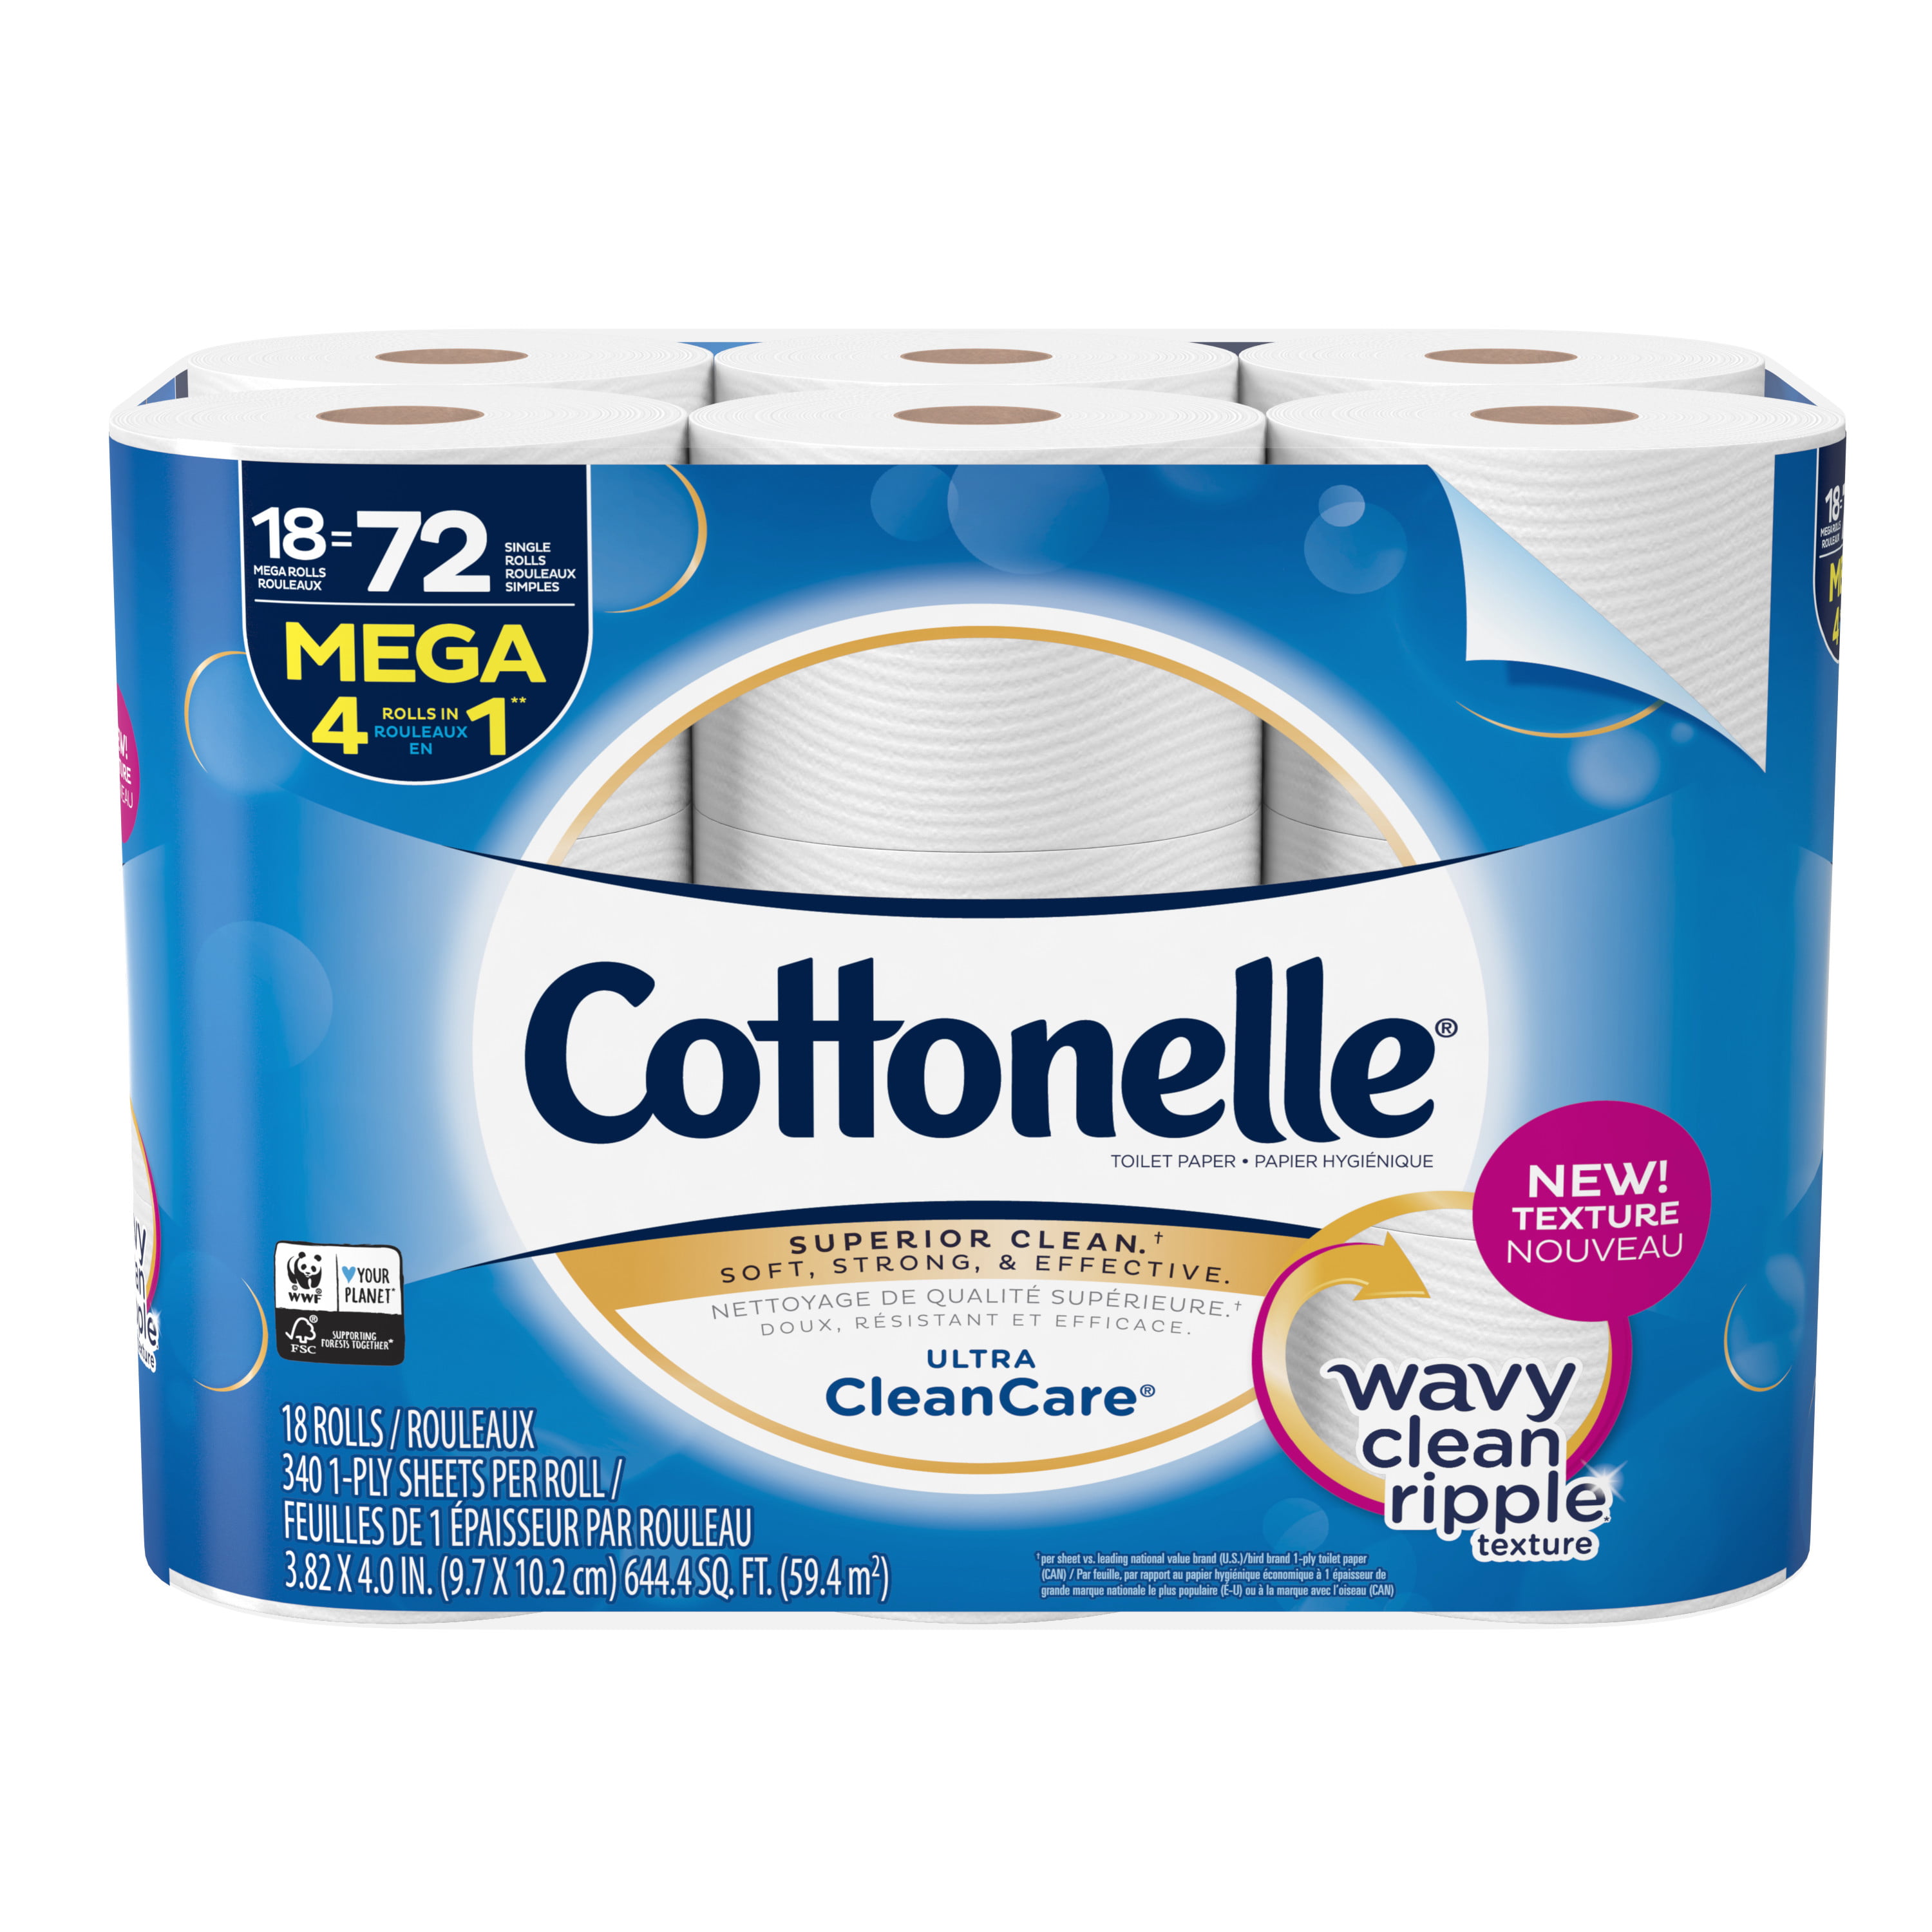 cottonelle-ultra-cleancare-toilet-paper-strong-bath-tissue-septic